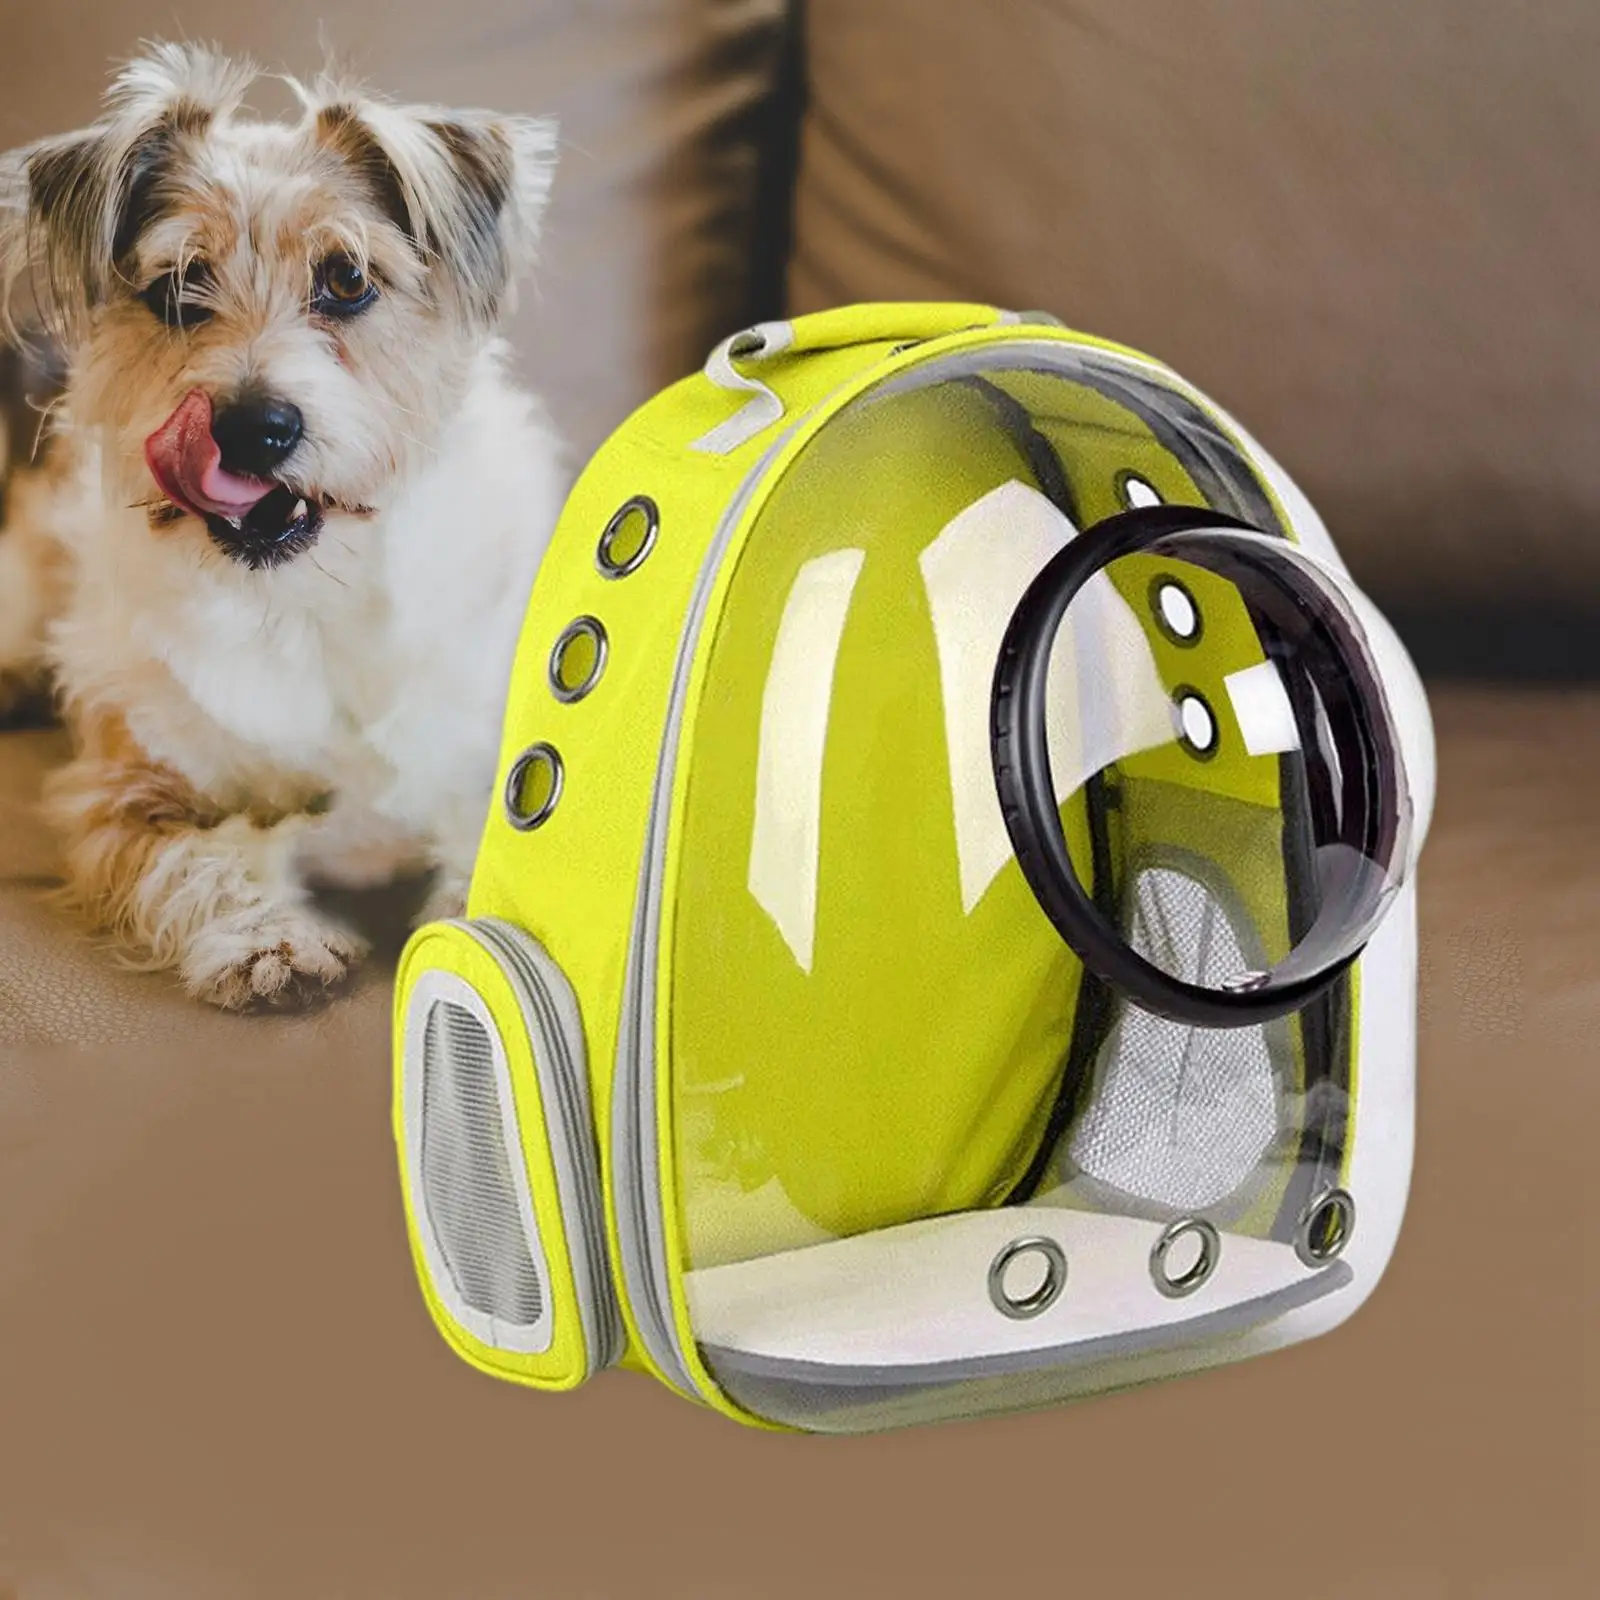 Pet Backpack Handbag Breathable Space Capsule Heat Proof Bubble Bag Dog Cat Carrier Bag for Small Cute Pet Travel Hiking Camping